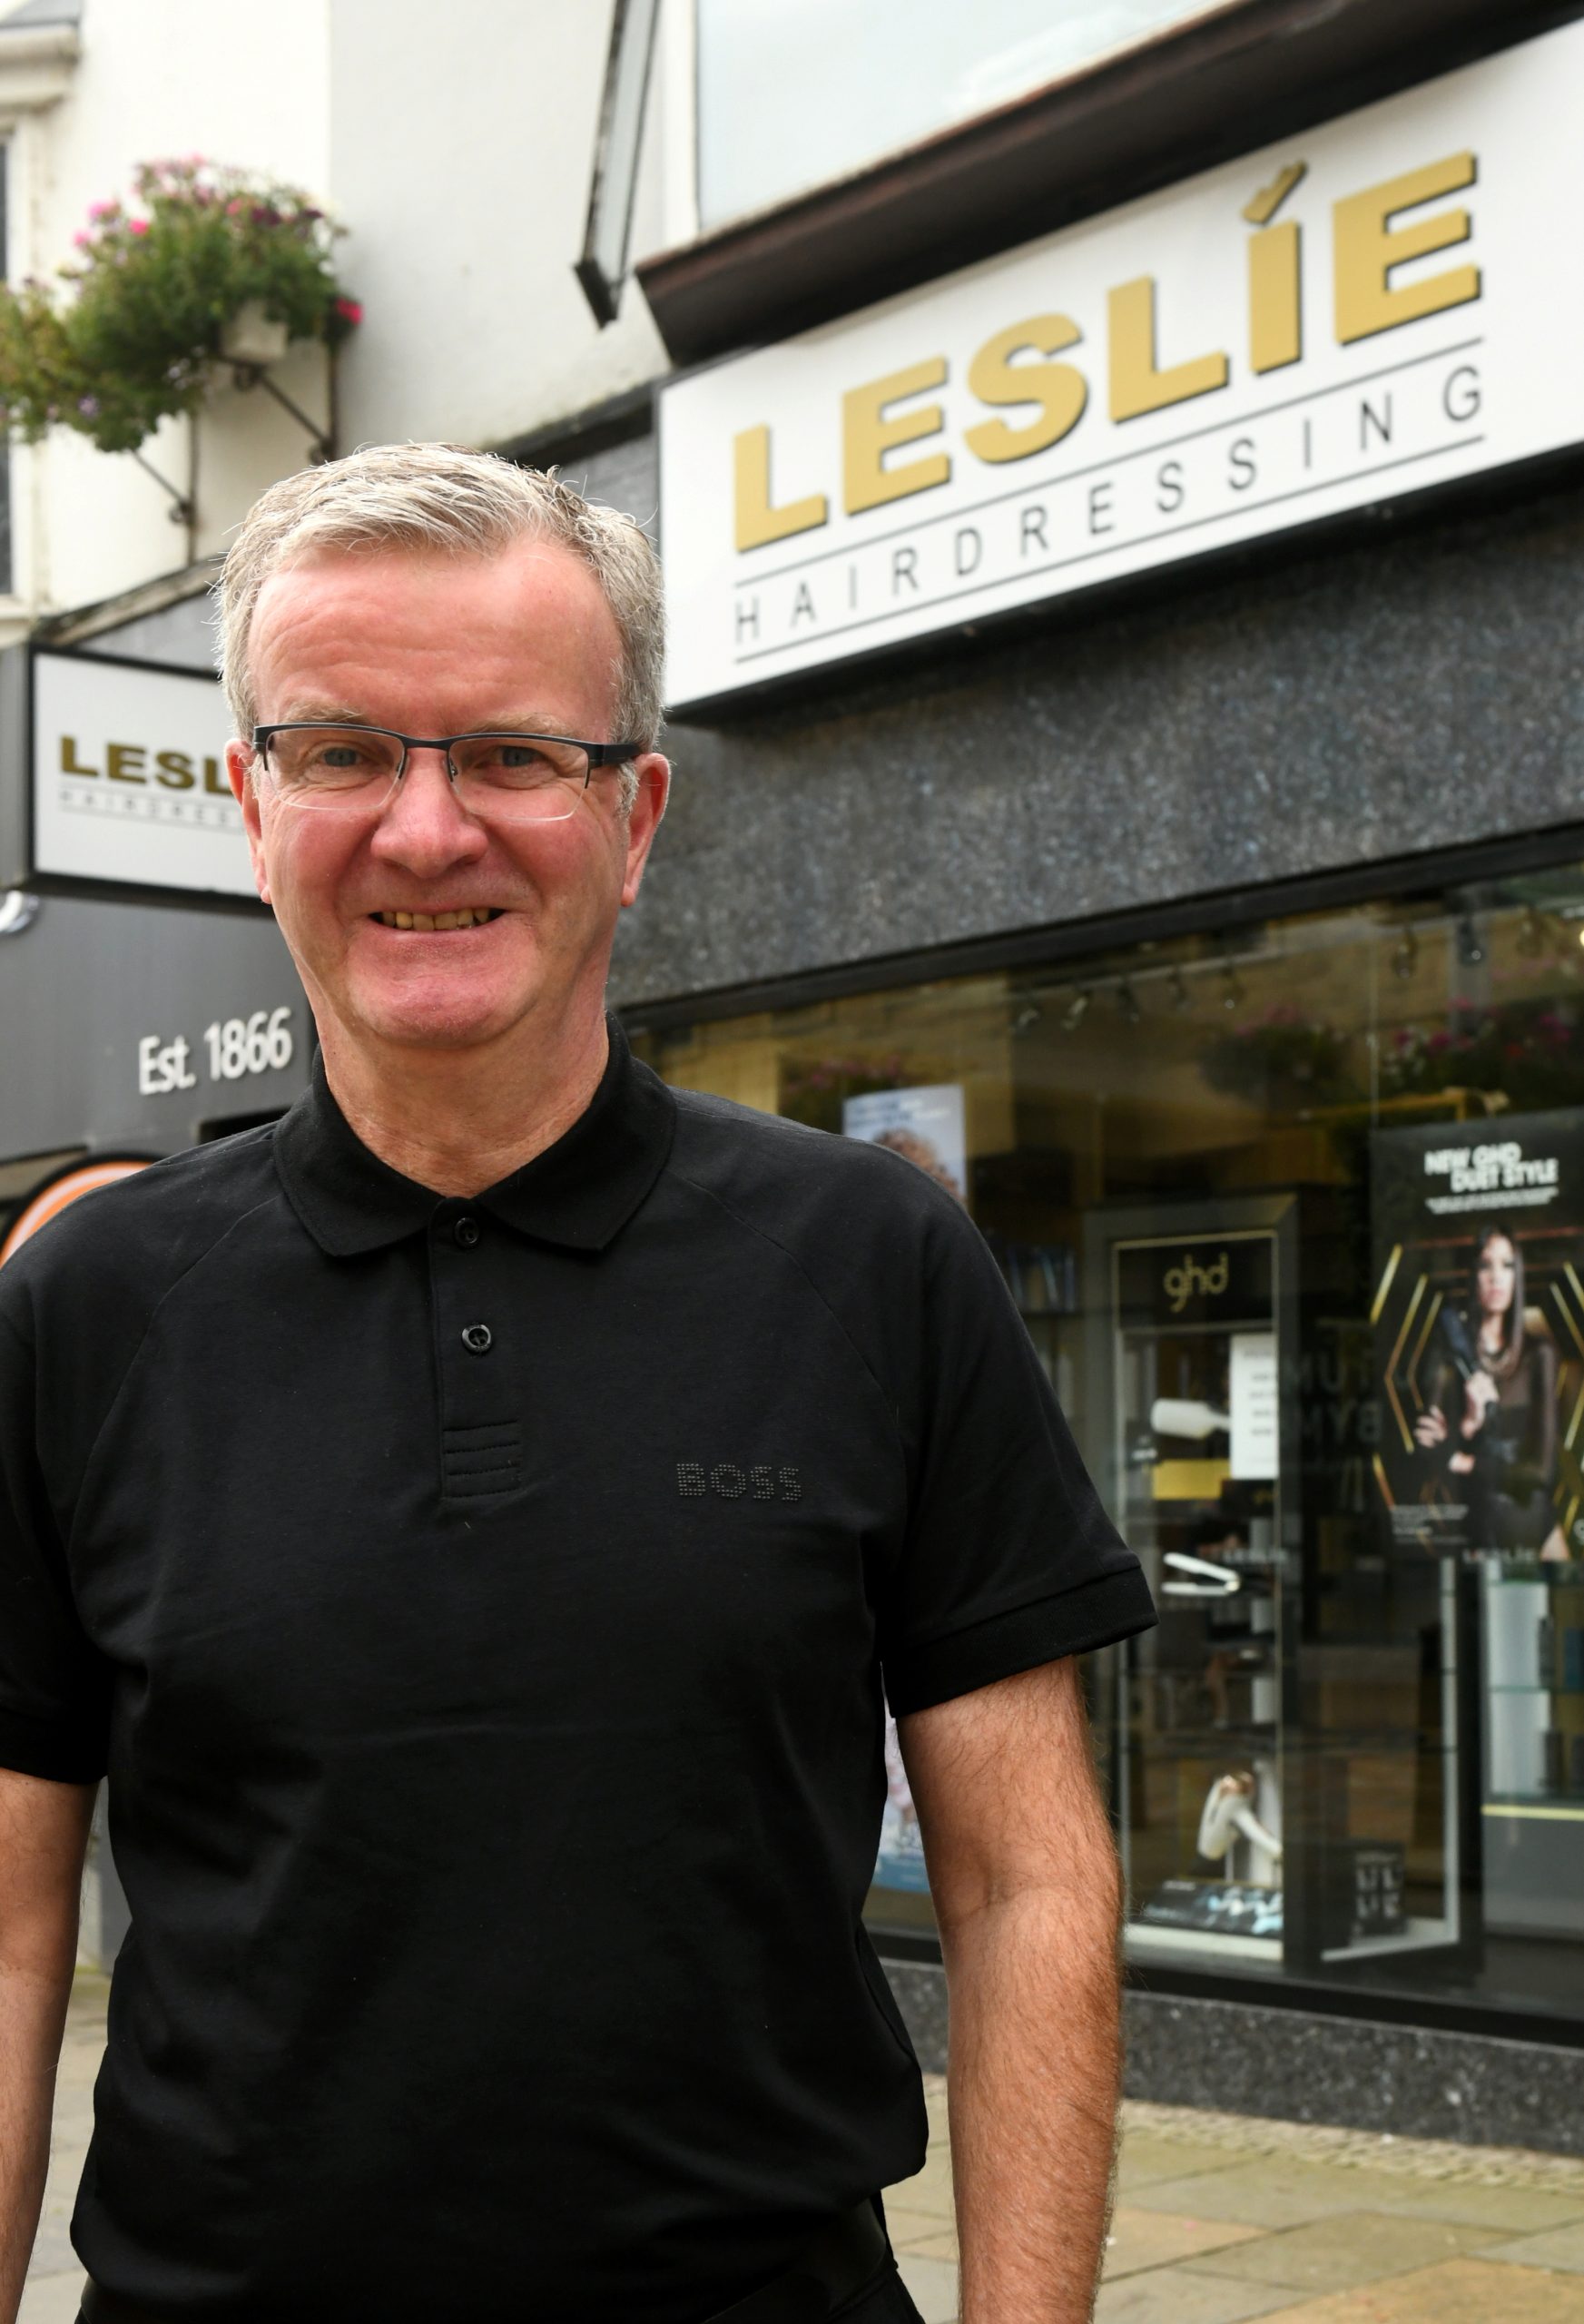 Person Behind the Business featuring Graeme Thomson of Leslie’s